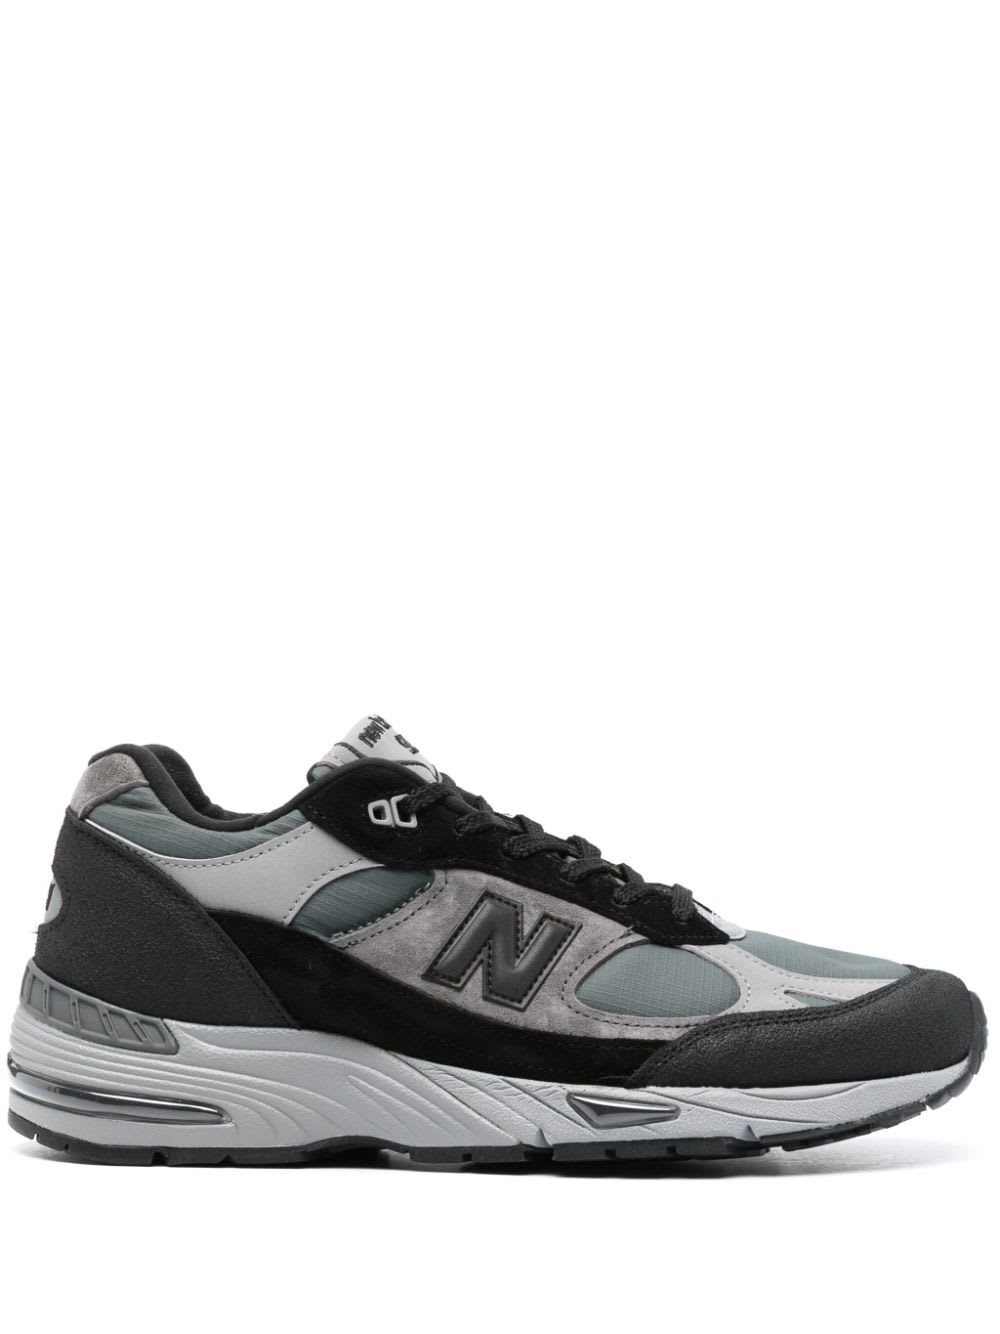 Shop New Balance 991 Lifestyle Sneakers In Black Grey